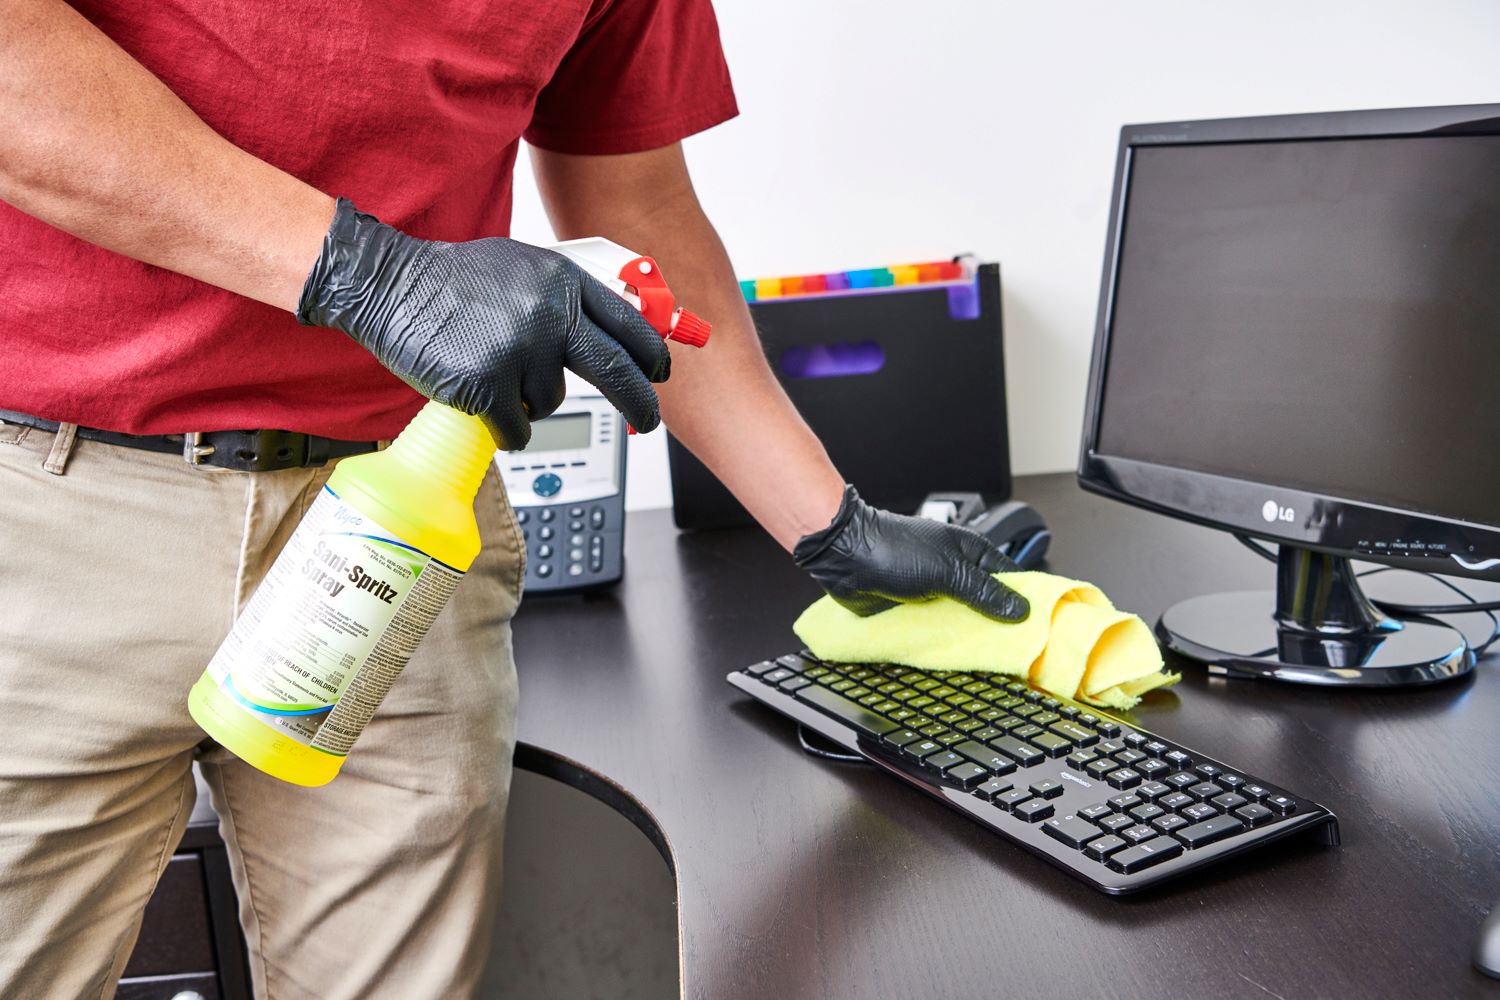 How To Clean Desks And Other Office Items That Are Pretty Germy